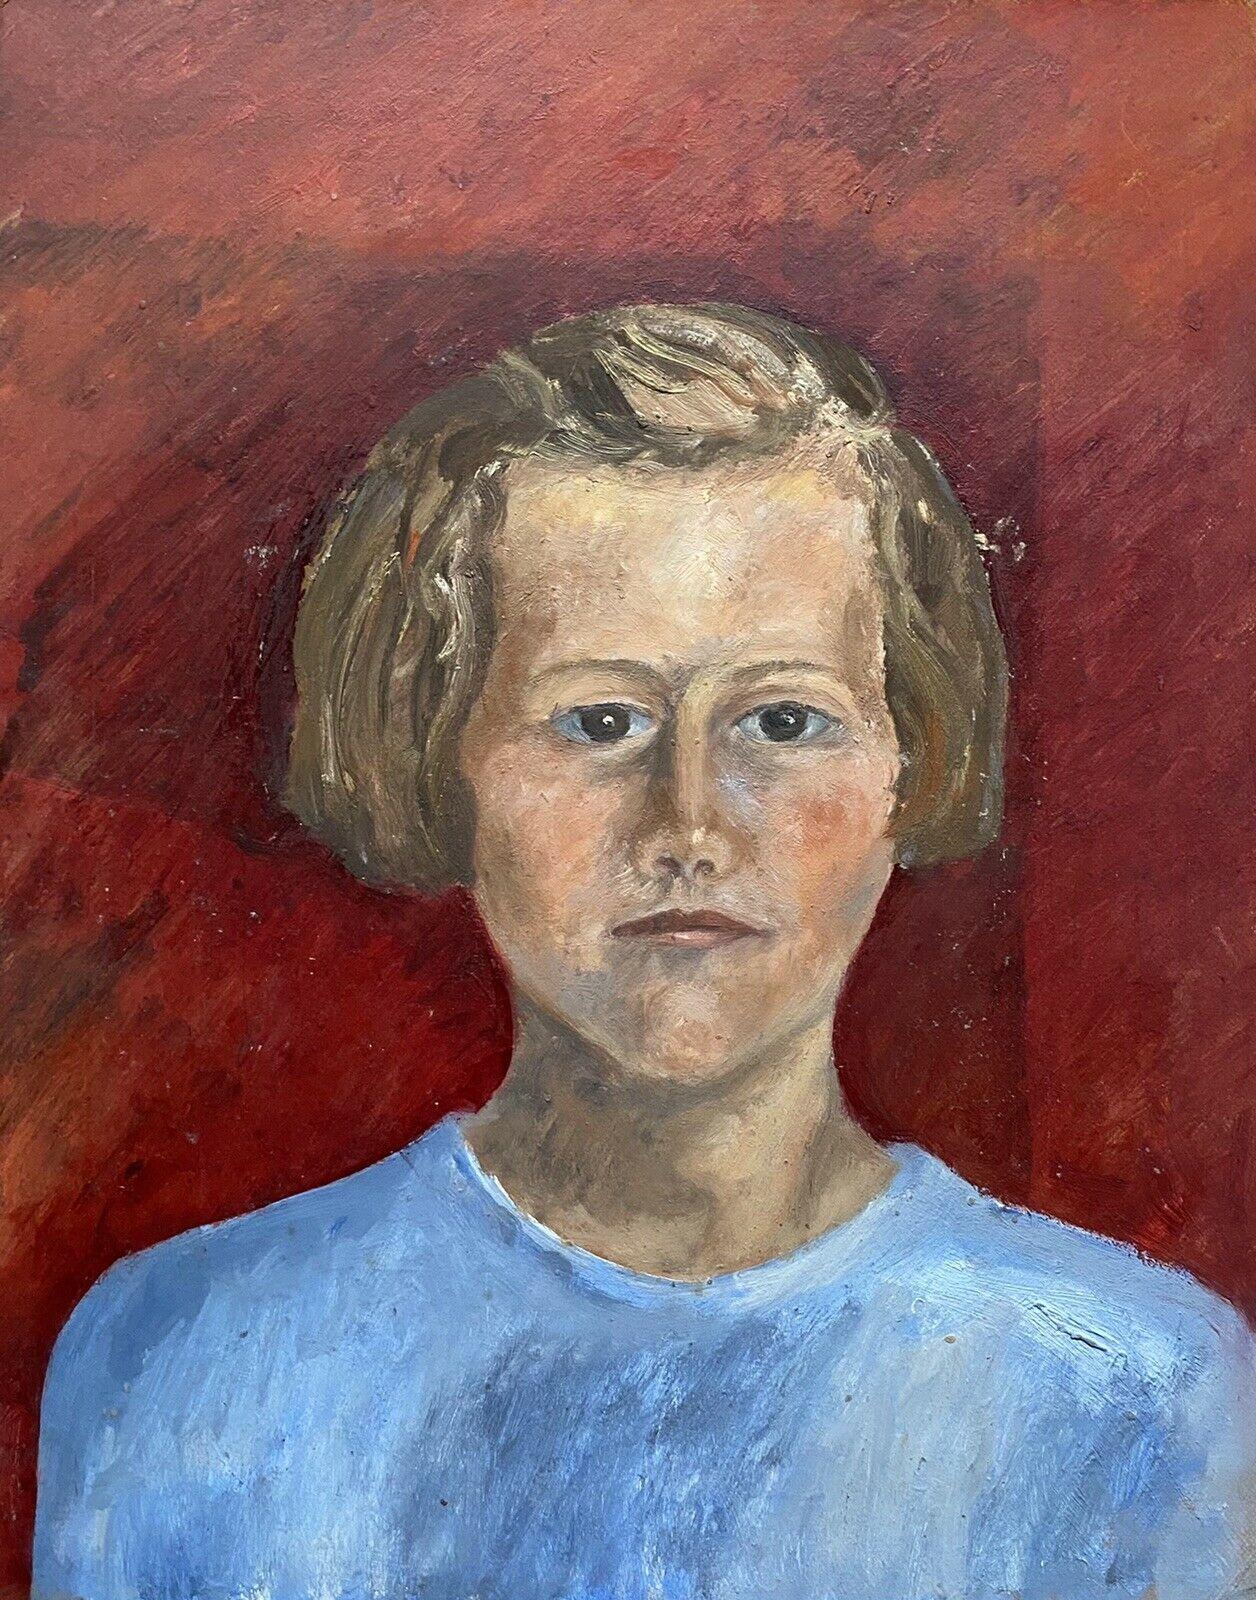 "Portrait"
by Geneviève Zondervan (French 1922-2013)
oil painting on board

board: 16 x 13 inches

Superb mid-century oil painting on board by the French artist, Geneviève Zondervan (French 1922-2013). The painting has excellent provenance, having